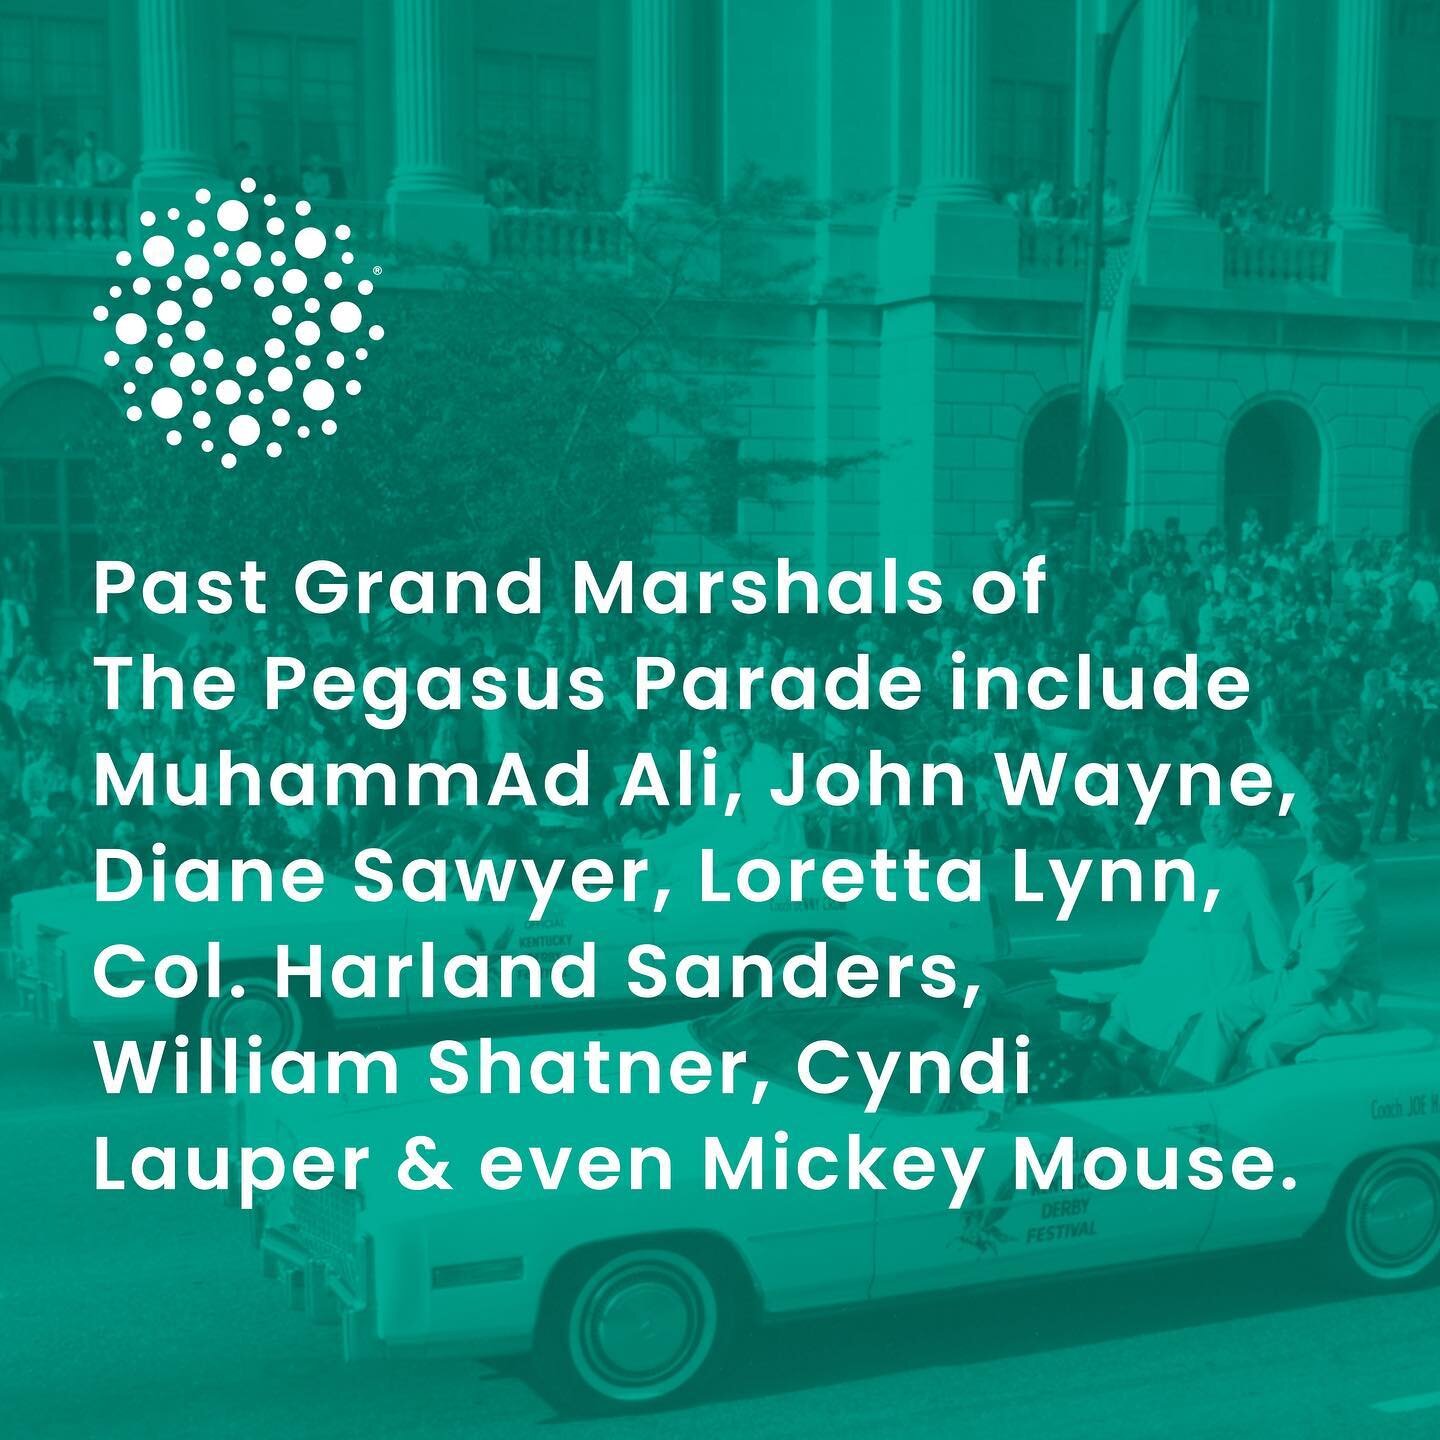 The Pegasus Parade was the first event to usher in what eventually became The Kentucky Derby Festival. ⁣
⁣
Here are just a few of our favorite past Grand Marshals of the parade. The entire list is pretty wild if you have time to check it out while en